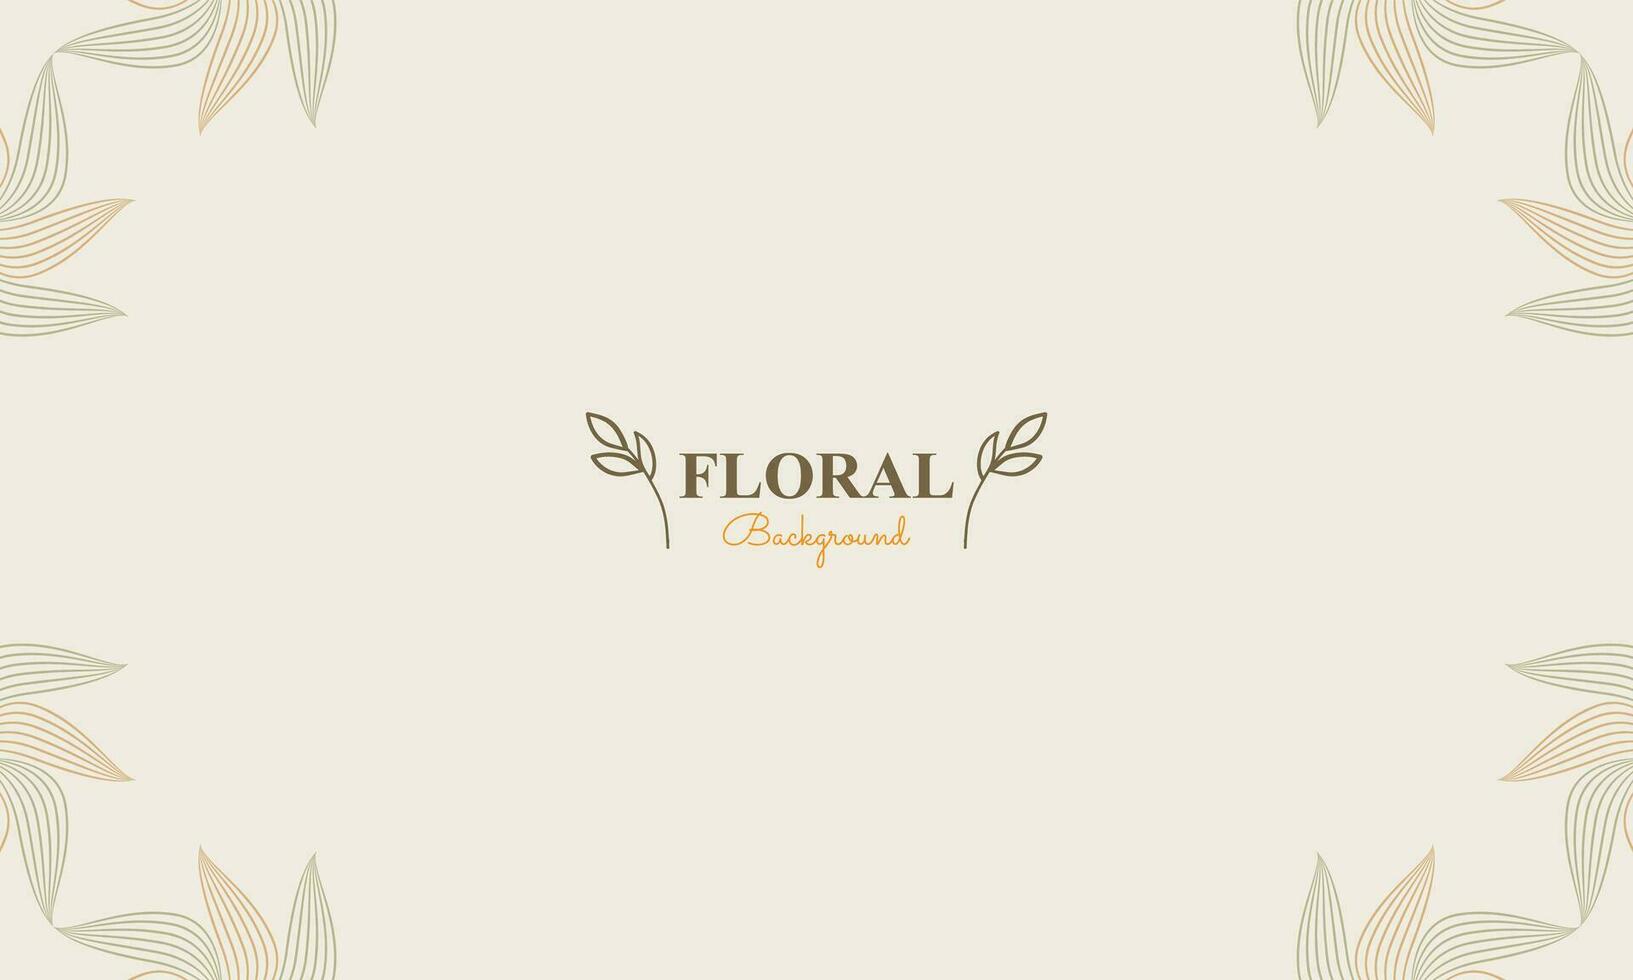 natural floral background with abstract natural shape, leaf and floral ornament in soft color style vector